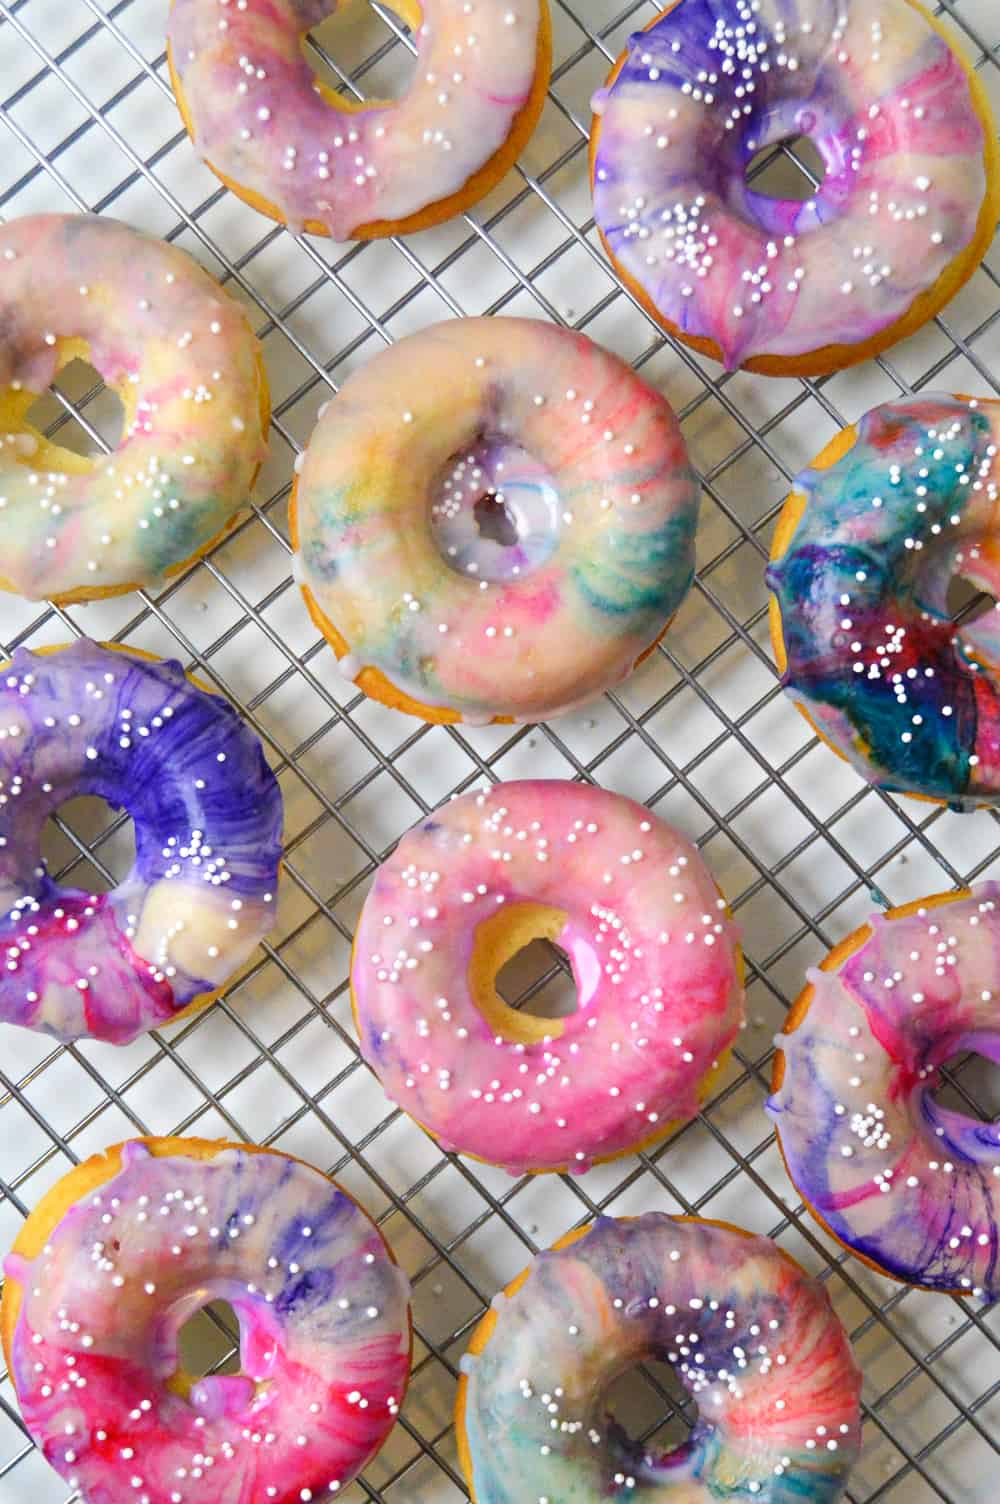 Marbled donuts